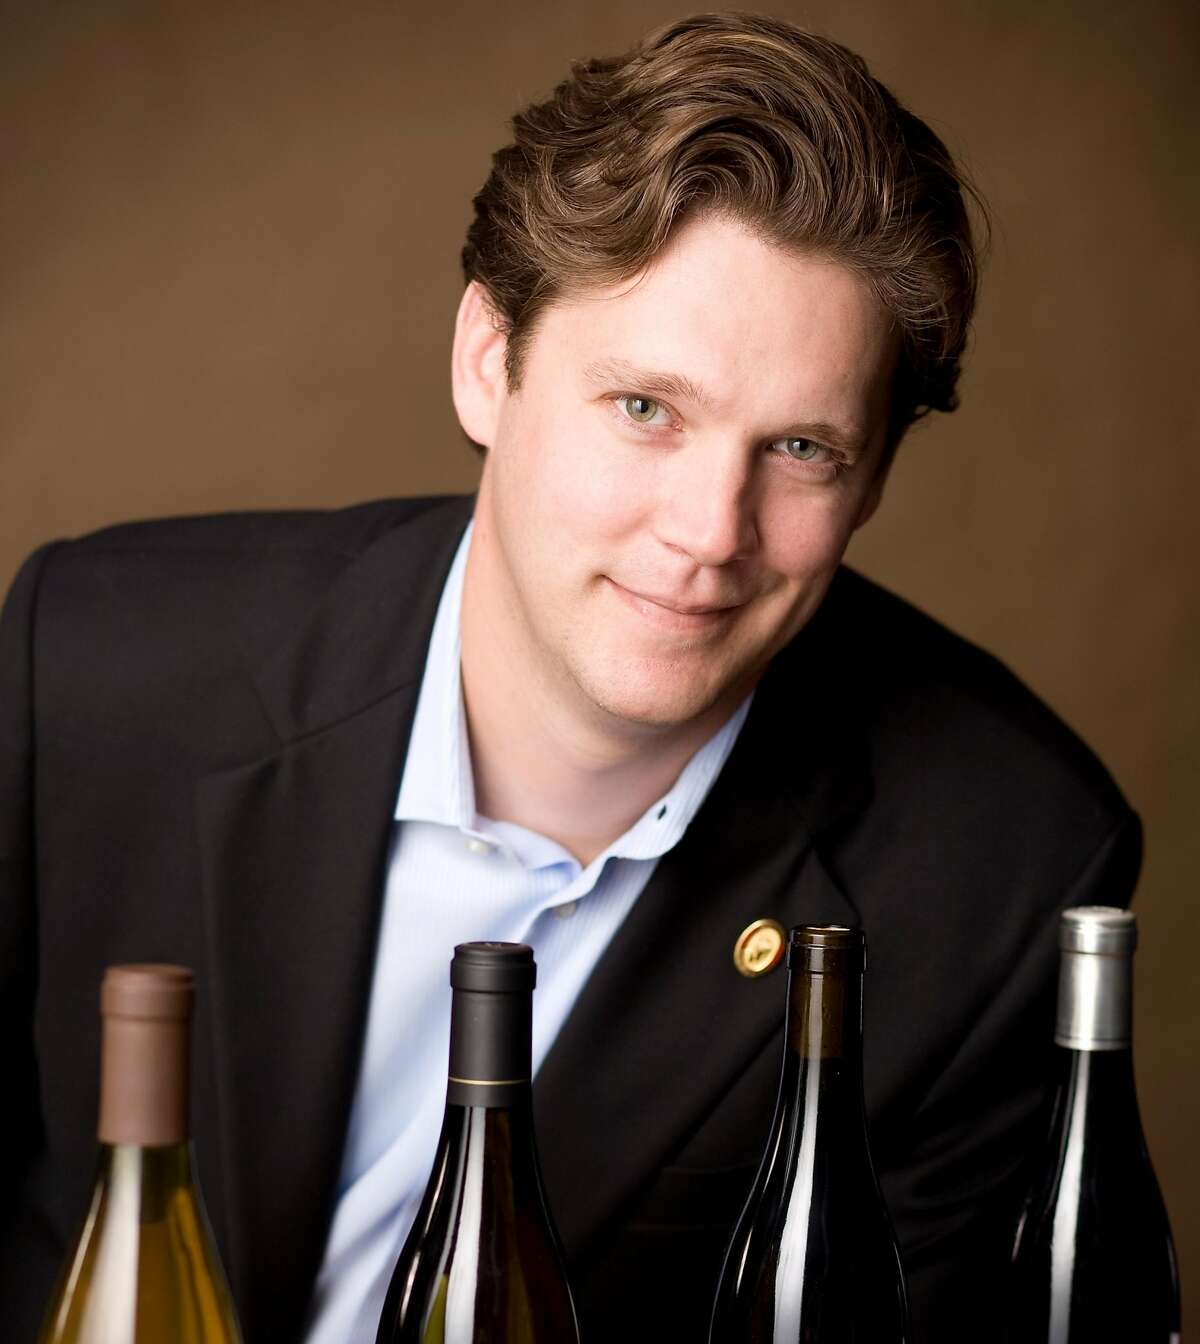 Geoff Kruth, pictured when he was the wine director of the Farmhouse Inn in Forestville (Sonoma County), has been accused of sexual misconduct, according to the New York Times.